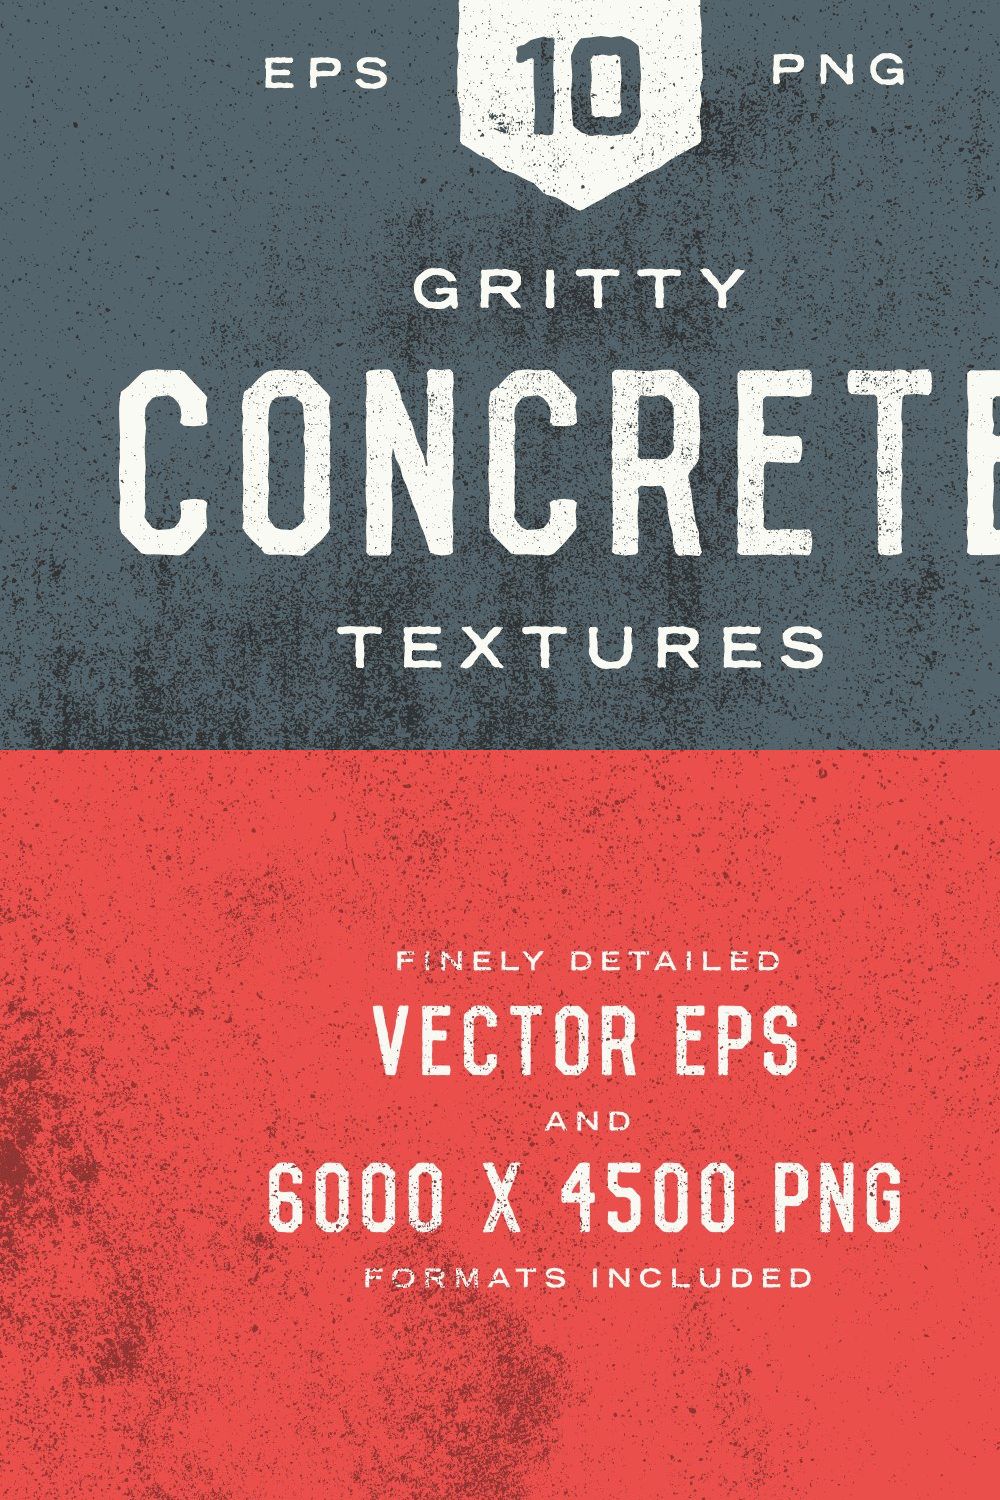 Gritty Concrete Textures pinterest preview image.